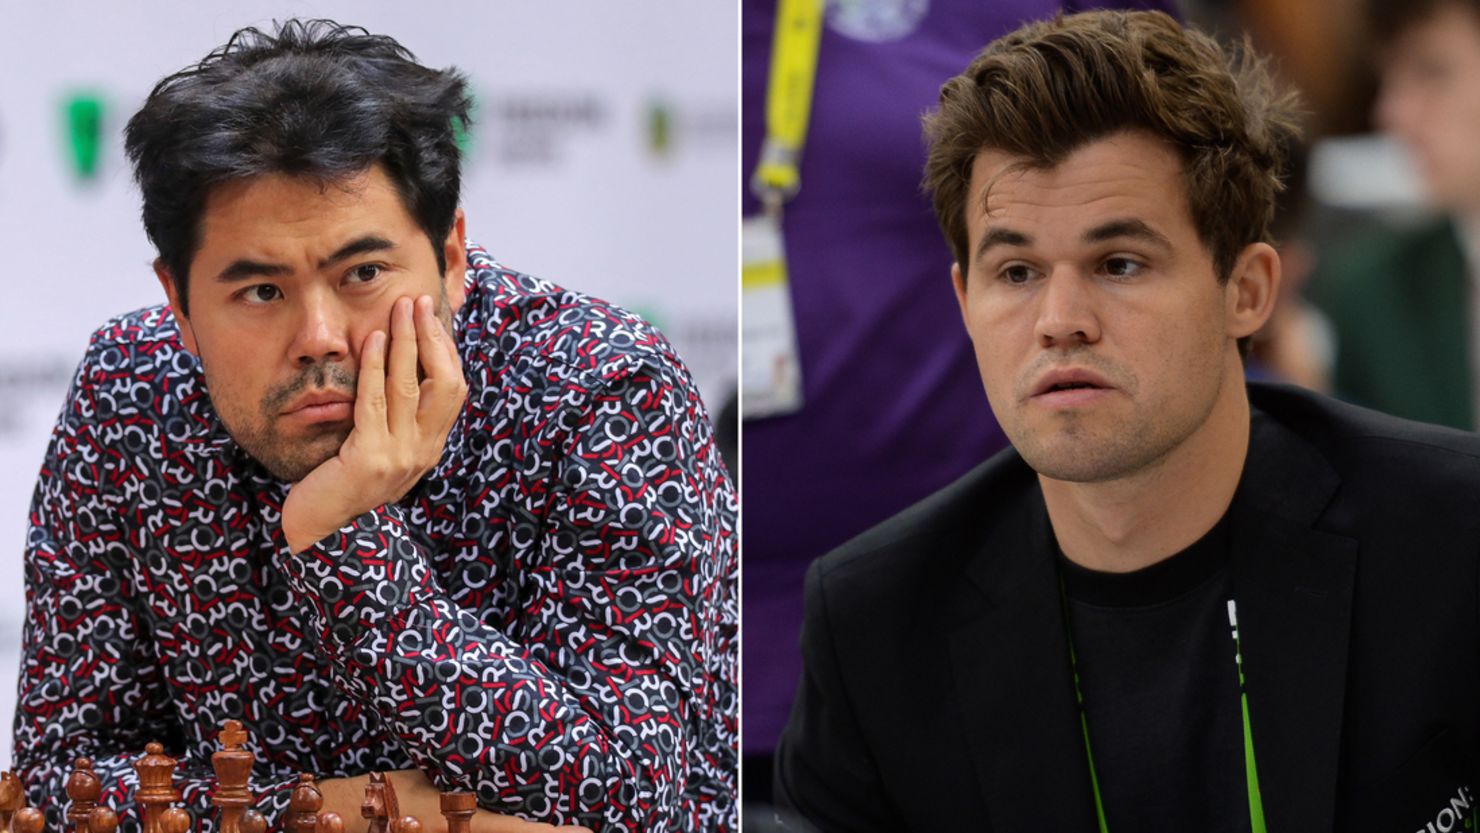 Carlsen vs. Nakamura: Clash of Chess Titans in AI Cup 2023 Semifinals! —  Eightify